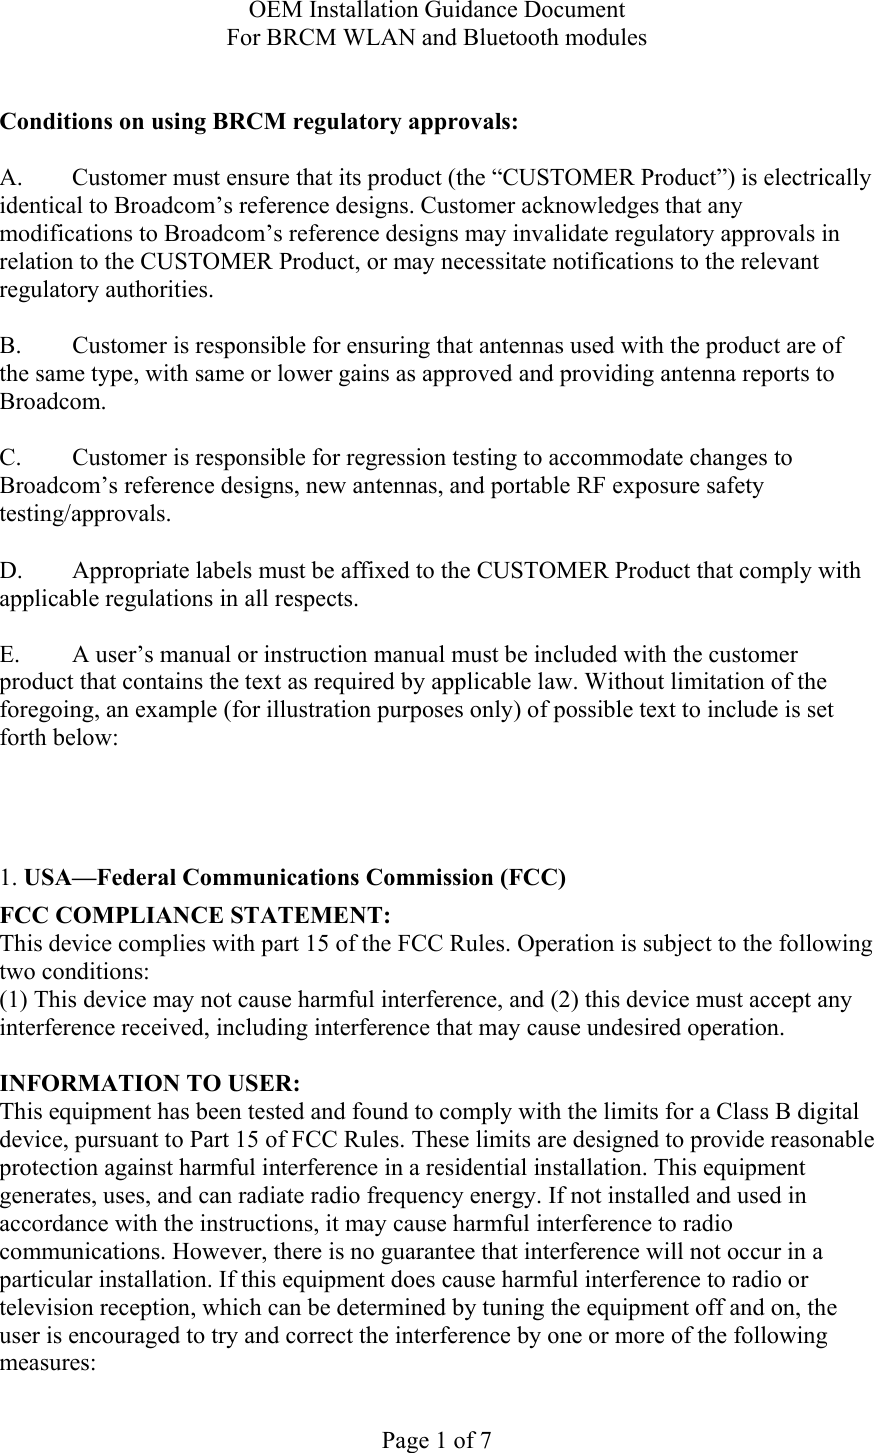 OEM Installation Guidance Document For BRCM WLAN and Bluetooth modules  Page 1 of 7  Conditions on using BRCM regulatory approvals:   A.  Customer must ensure that its product (the “CUSTOMER Product”) is electrically identical to Broadcom’s reference designs. Customer acknowledges that any modifications to Broadcom’s reference designs may invalidate regulatory approvals in relation to the CUSTOMER Product, or may necessitate notifications to the relevant regulatory authorities.  B.   Customer is responsible for ensuring that antennas used with the product are of the same type, with same or lower gains as approved and providing antenna reports to Broadcom.  C.   Customer is responsible for regression testing to accommodate changes to Broadcom’s reference designs, new antennas, and portable RF exposure safety testing/approvals.  D.  Appropriate labels must be affixed to the CUSTOMER Product that comply with applicable regulations in all respects.    E.  A user’s manual or instruction manual must be included with the customer product that contains the text as required by applicable law. Without limitation of the foregoing, an example (for illustration purposes only) of possible text to include is set forth below:      1. USA—Federal Communications Commission (FCC) FCC COMPLIANCE STATEMENT: This device complies with part 15 of the FCC Rules. Operation is subject to the following two conditions: (1) This device may not cause harmful interference, and (2) this device must accept any interference received, including interference that may cause undesired operation.  INFORMATION TO USER: This equipment has been tested and found to comply with the limits for a Class B digital device, pursuant to Part 15 of FCC Rules. These limits are designed to provide reasonable protection against harmful interference in a residential installation. This equipment generates, uses, and can radiate radio frequency energy. If not installed and used in accordance with the instructions, it may cause harmful interference to radio communications. However, there is no guarantee that interference will not occur in a particular installation. If this equipment does cause harmful interference to radio or television reception, which can be determined by tuning the equipment off and on, the user is encouraged to try and correct the interference by one or more of the following measures:  